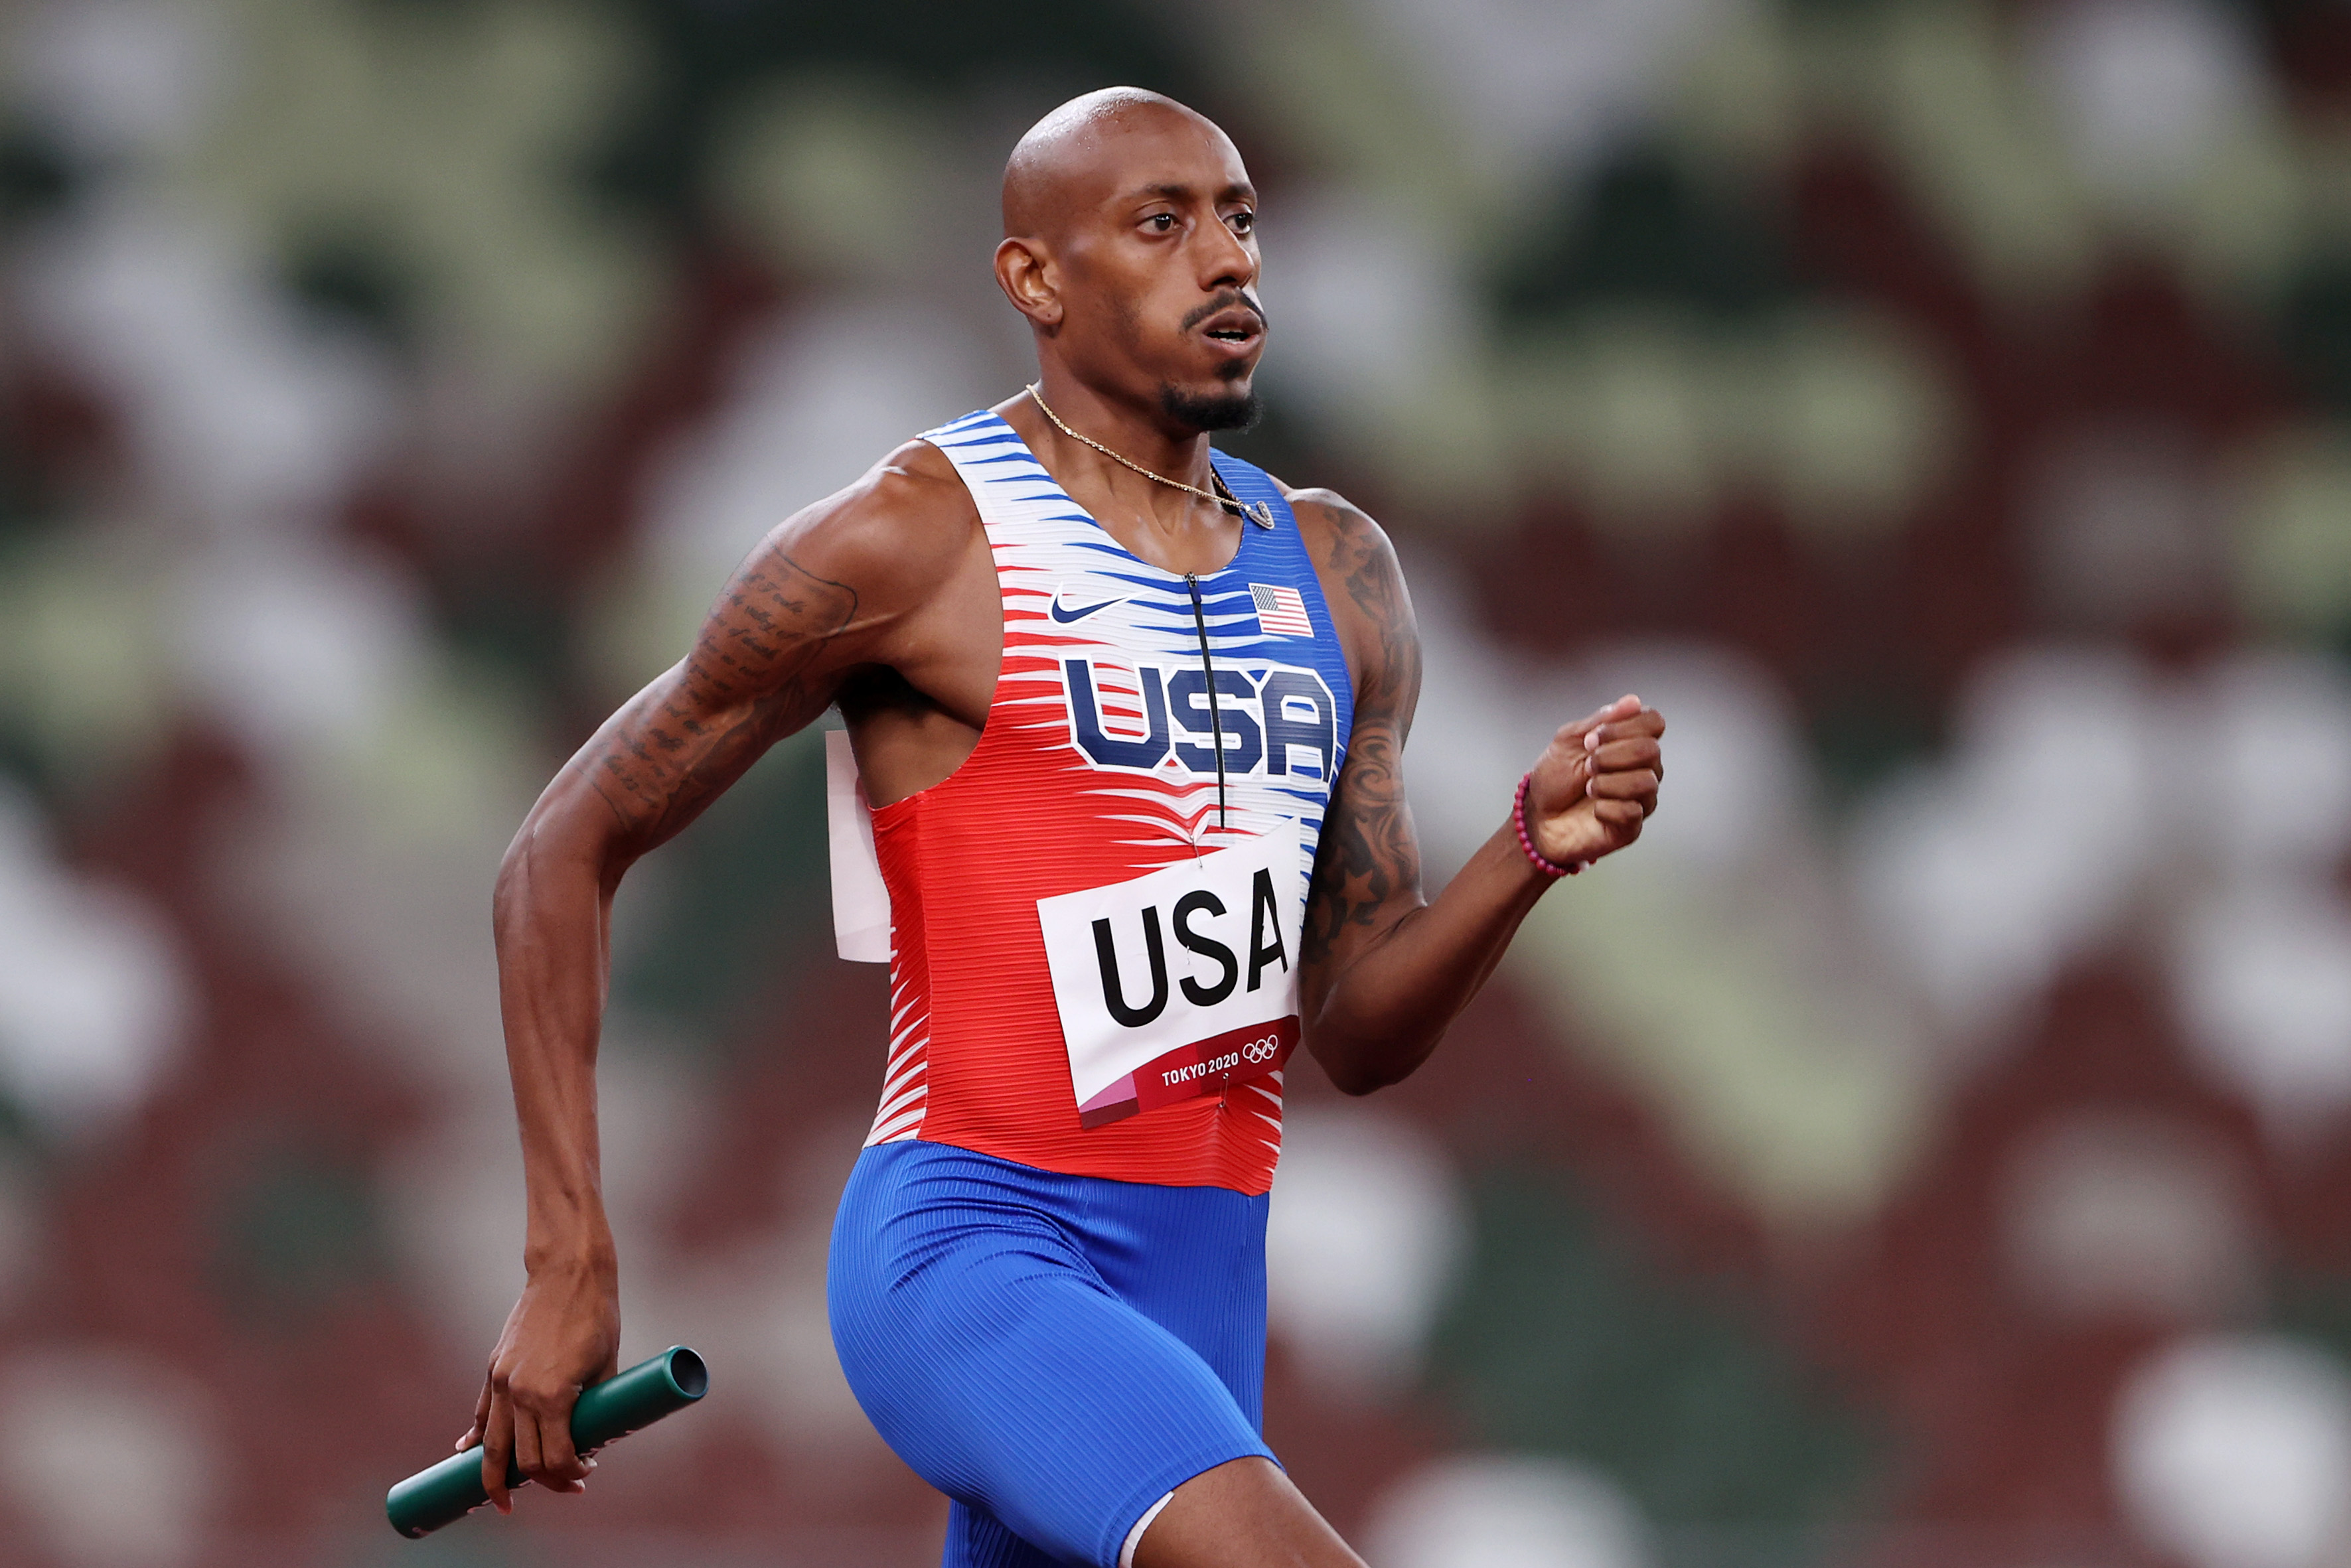 Vernon Norwood of Team United States competes in the Men’s 4 x 400m Relay heats on day fourteen of the Tokyo 2020 Olympic Games at Olympic Stadium on August 06, 2021 in Tokyo, Japan.